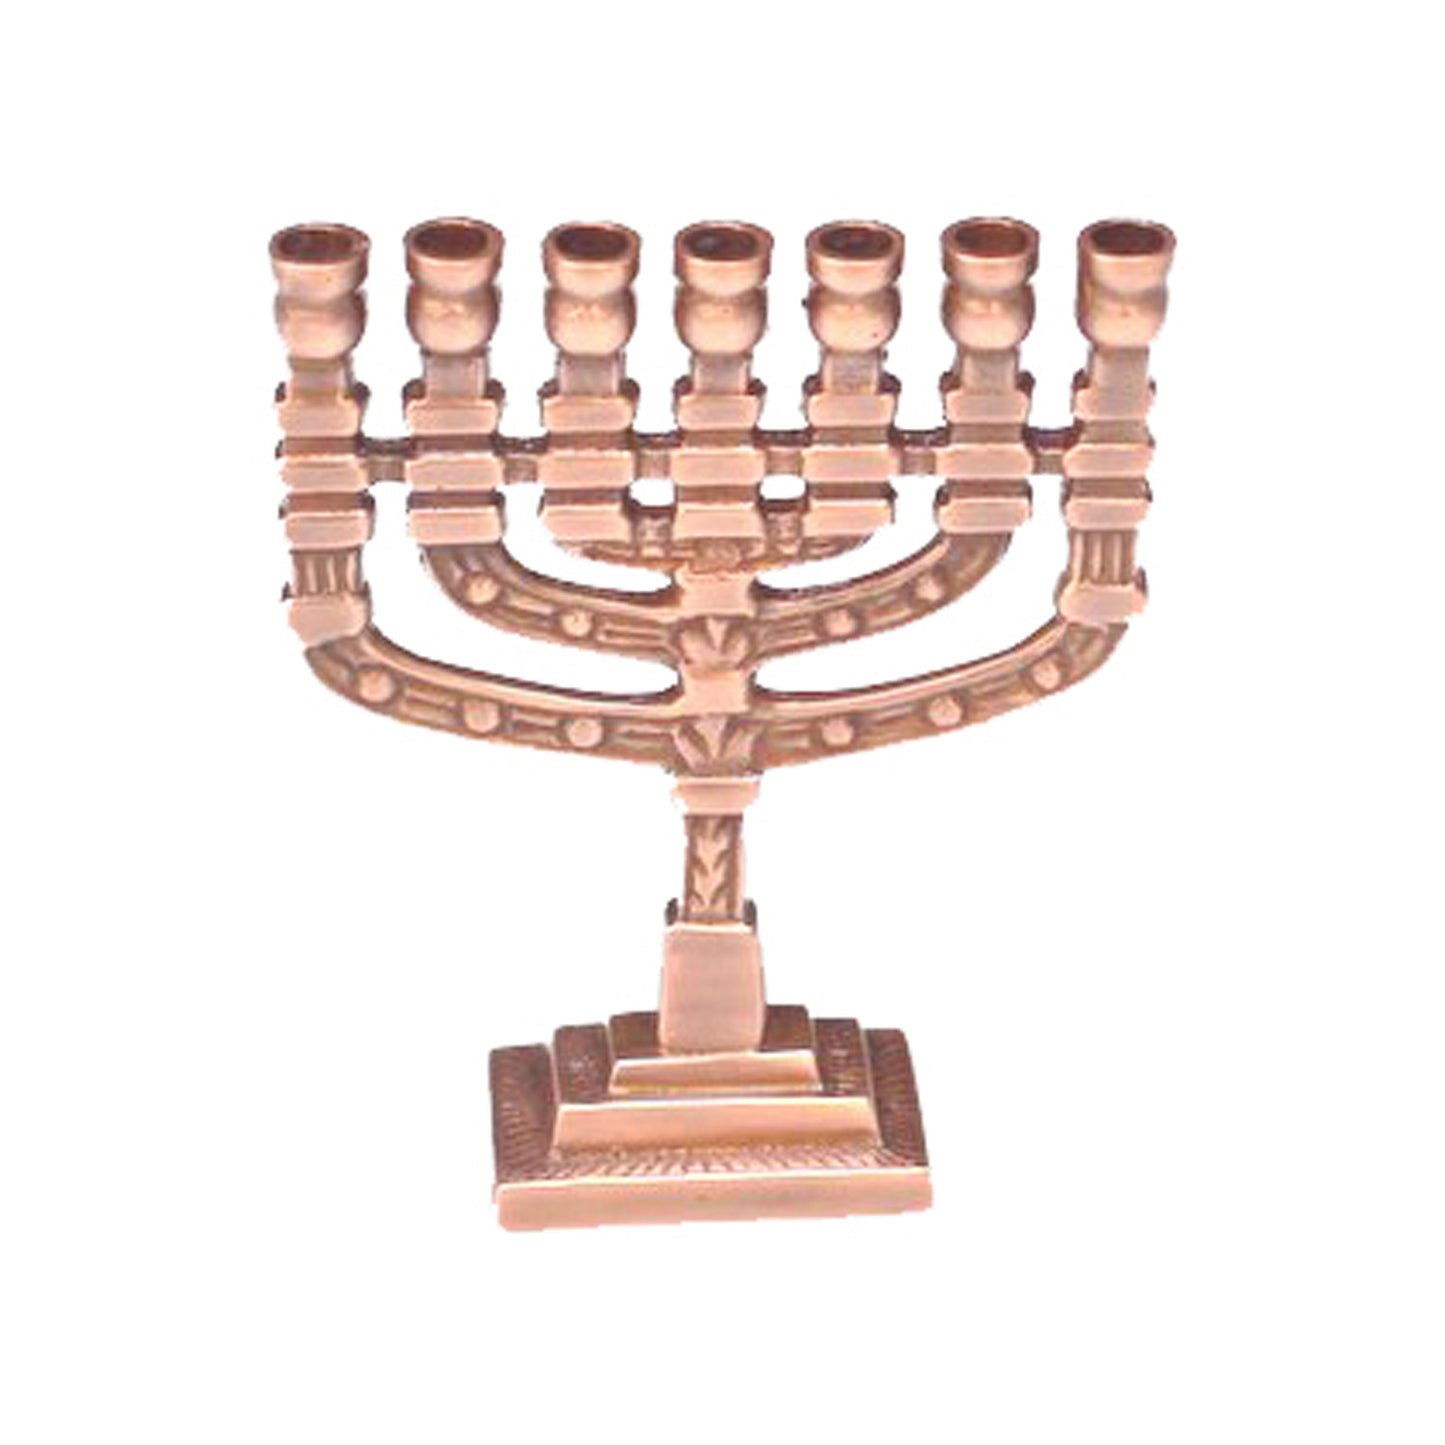 GiftBay 6026 Menorah 7-Branch, Small Size, Plated with Antique Copper Finish 3"x1"x3.75" H